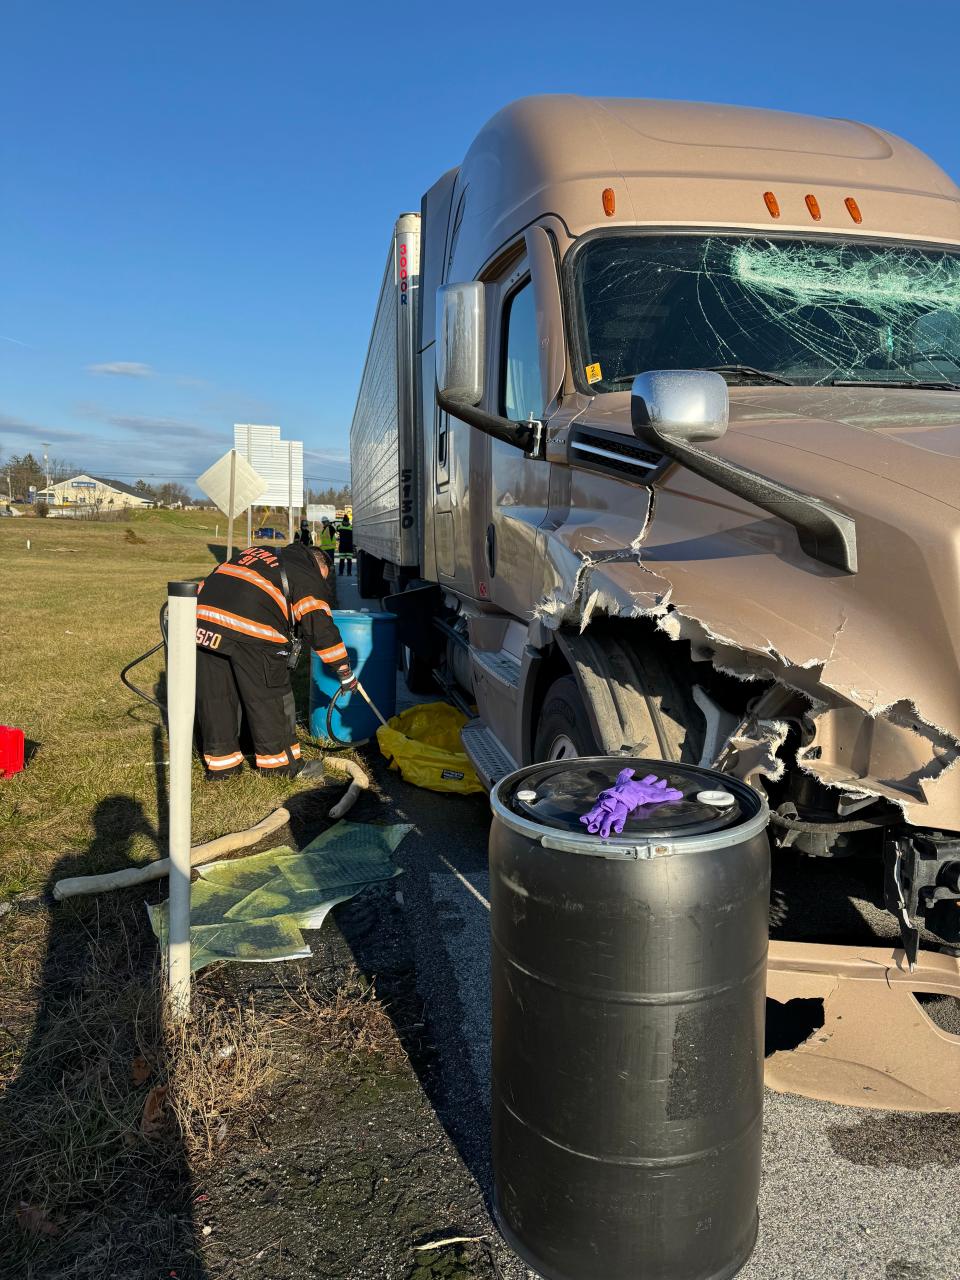 A truck was struck by debris and its saddle tank was ruptured during a crash on I-83 South on Wednesday afternoon, according to the York County Office of Emergency Management.